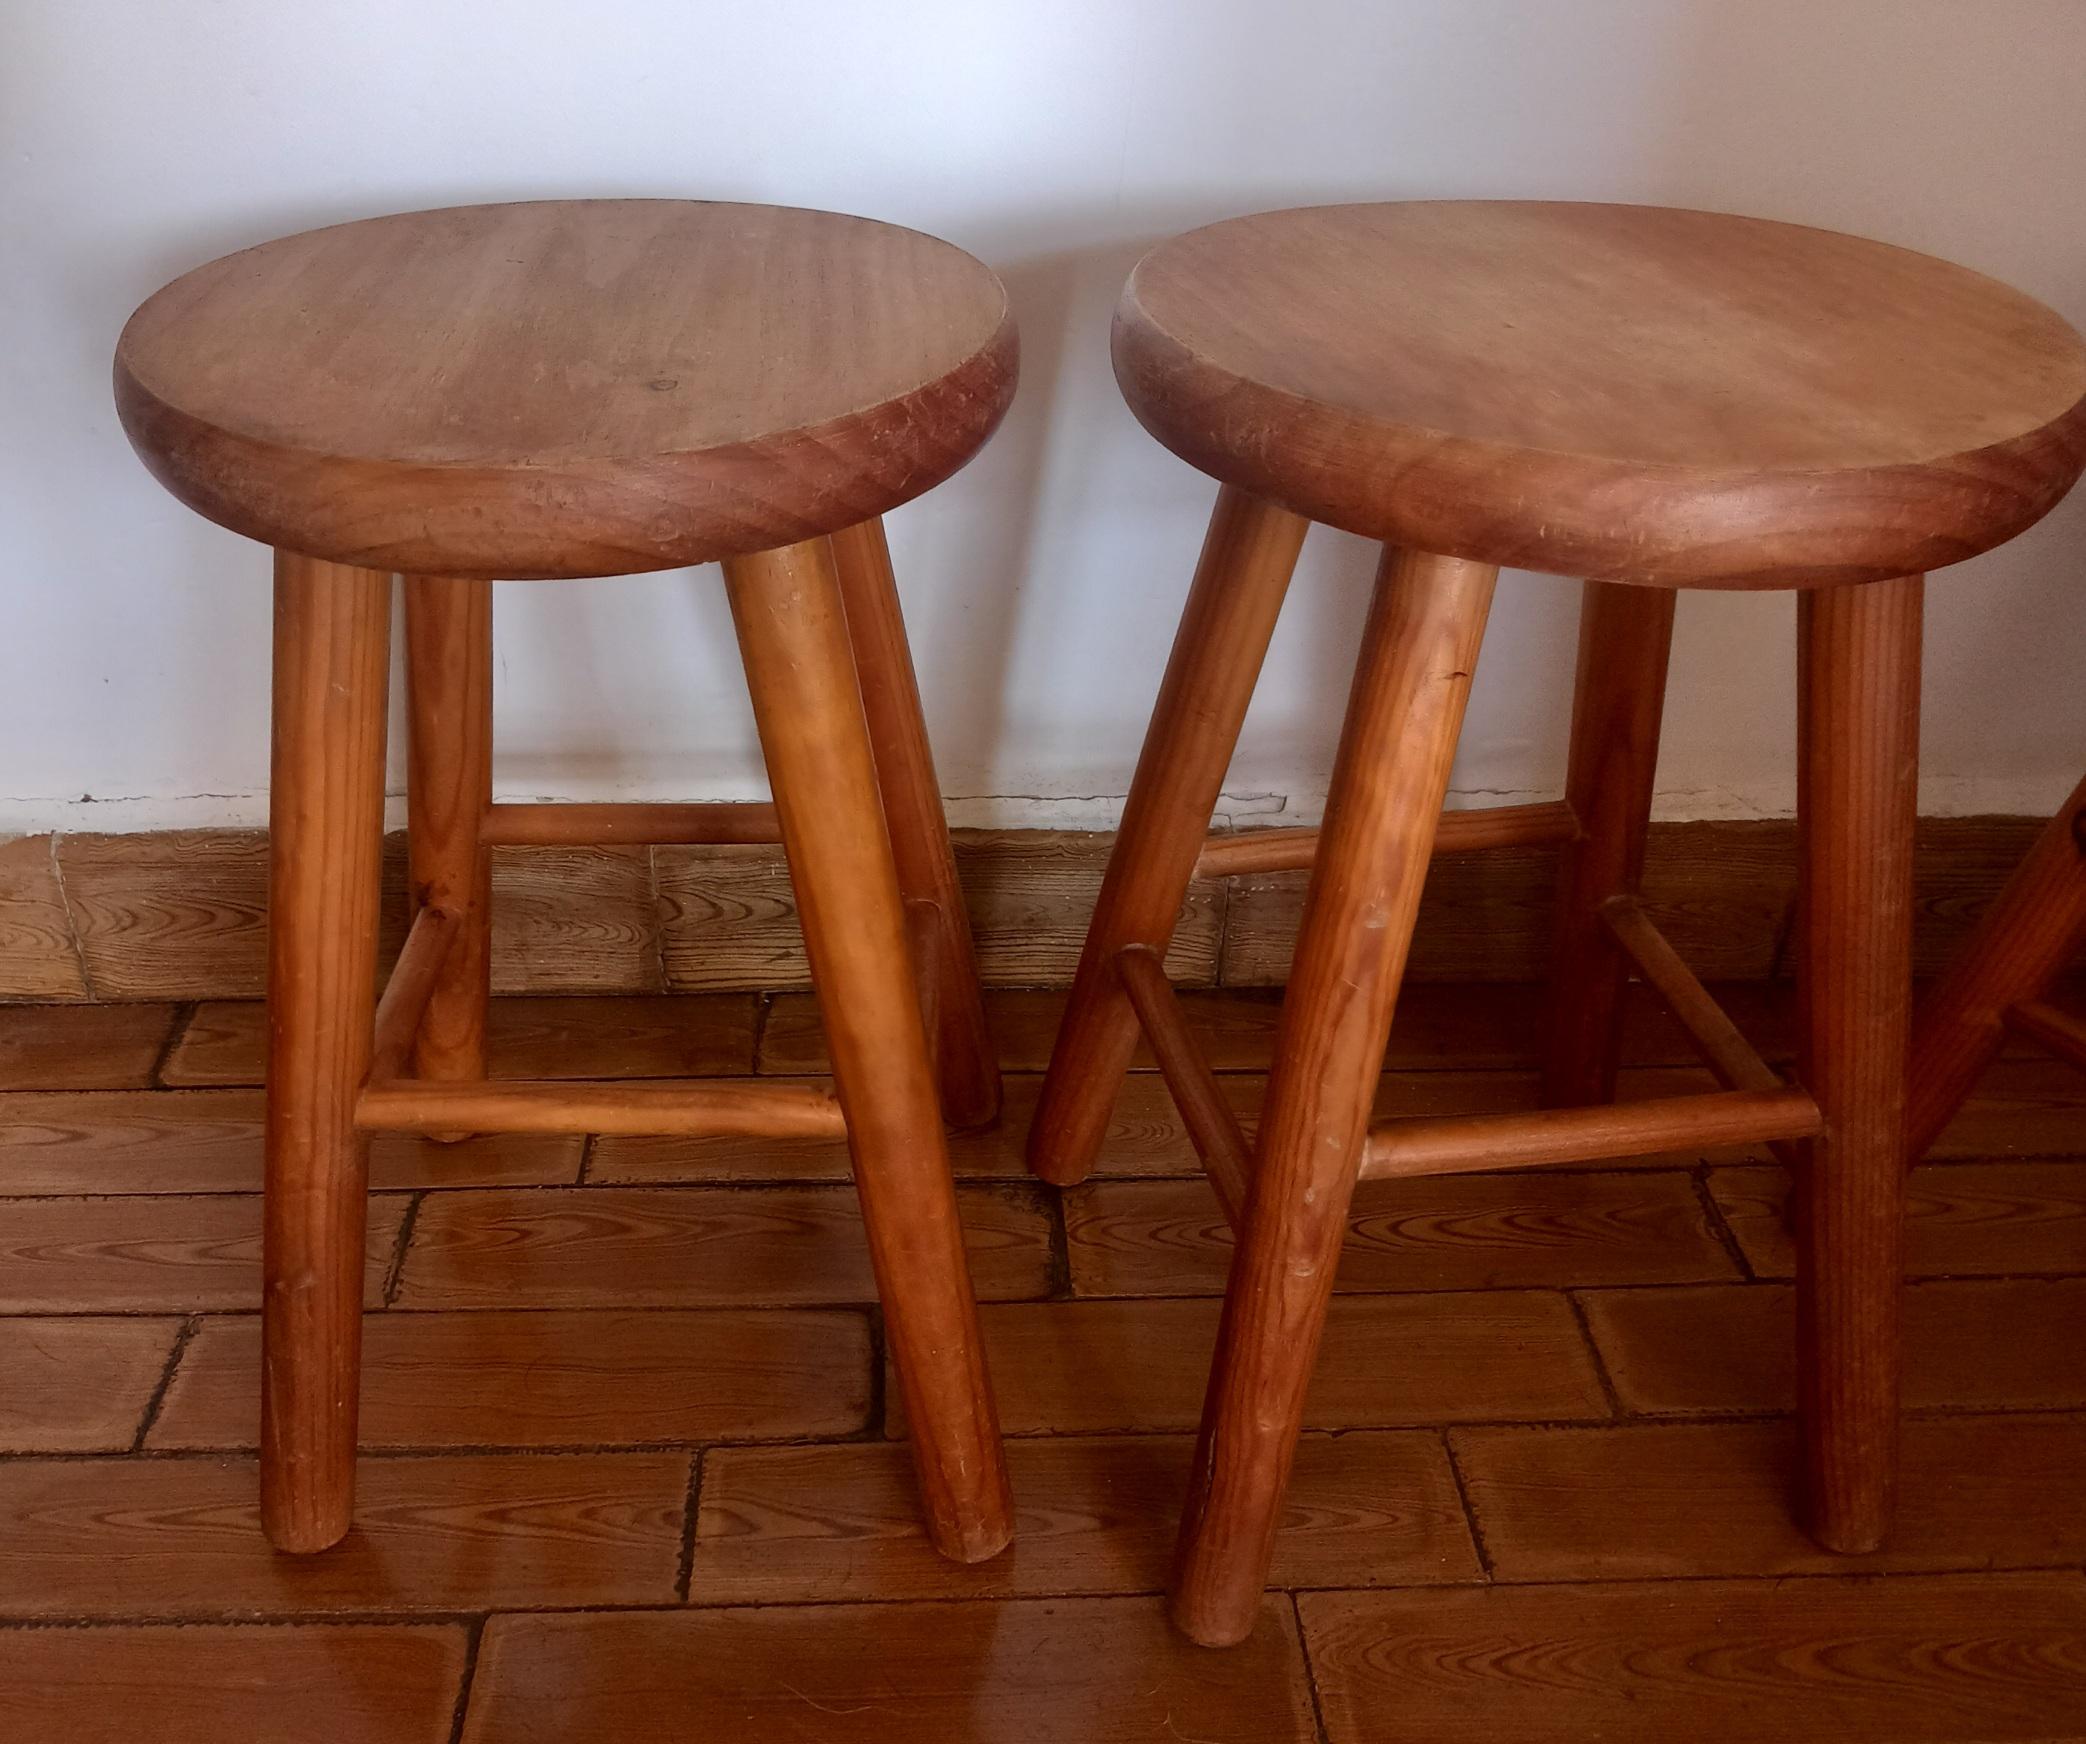 Scandinavian Modern Stools from the Mid 20th Century in Natural Wood For Sale